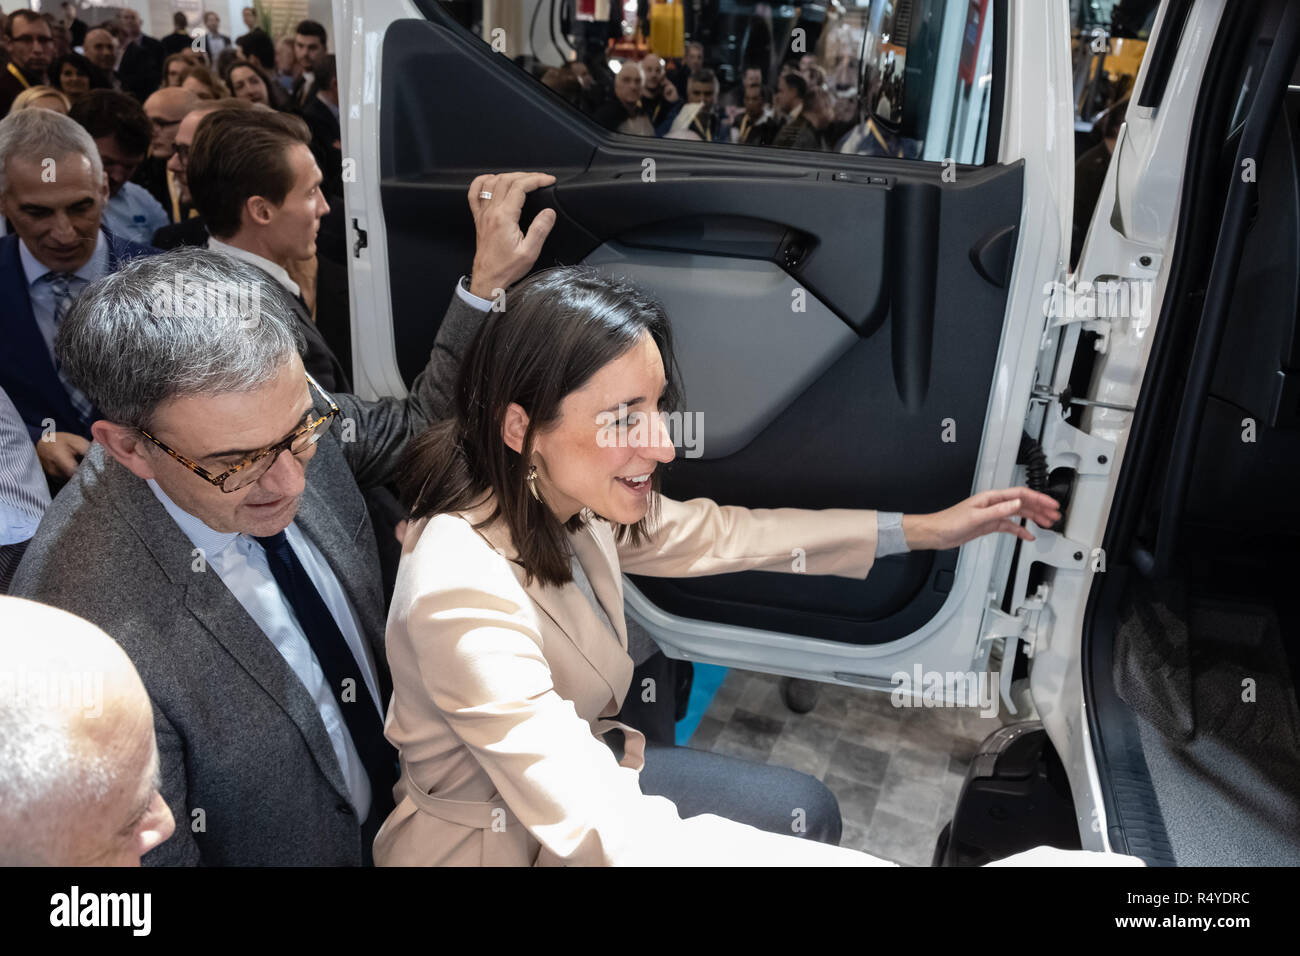 Lyon, France. 28th Nov 2018. Brune Poirson Secretary of State, Minister of the Ecological and Solidarity Transition, went to Pollutec, the 28th International Exhibition of Equipment, Technologies and Environmental Services. She was accompanied by Gérard Collomb, Mayor of Lyon and David Kimelfeld the President of the Metropolis of Lyon. Credit: FRANCK CHAPOLARD/Alamy Live News Stock Photo